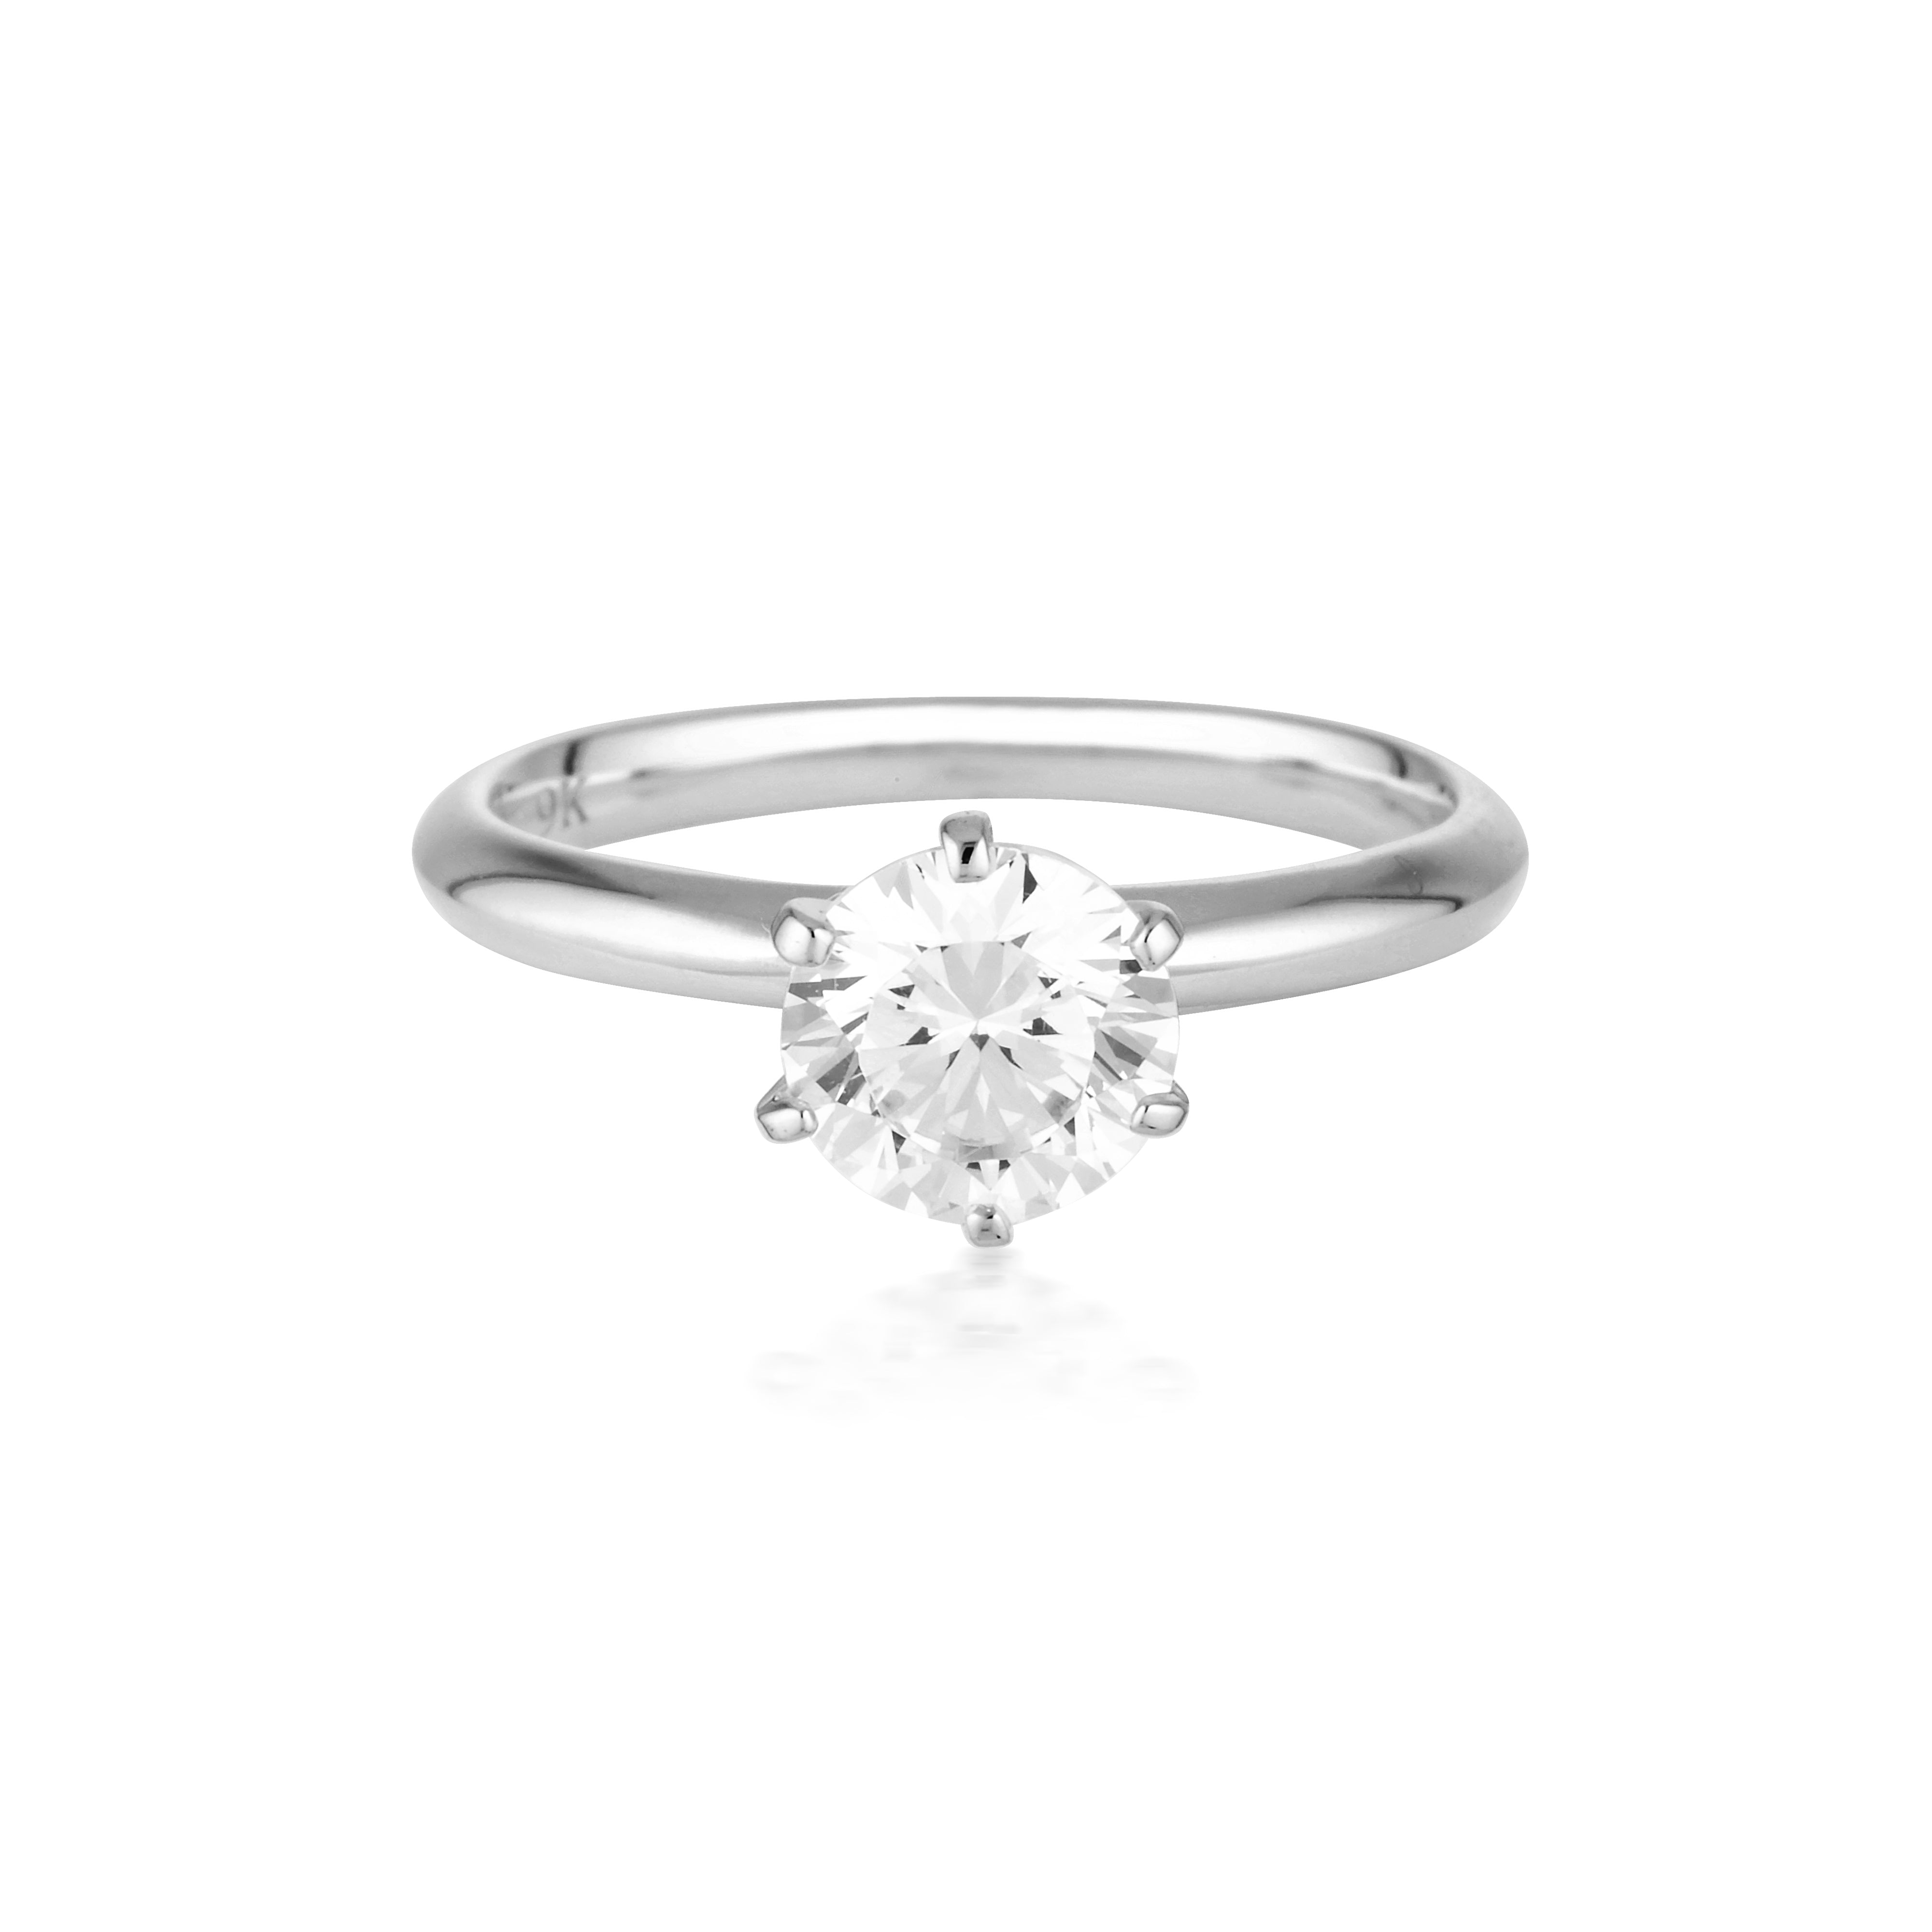 ROUND BRILLIANT CUT 1.25CTW MOISSANITE SOLITAIRE WITH KNIFE EDGE BAND IN 9CT WHITE GOLD